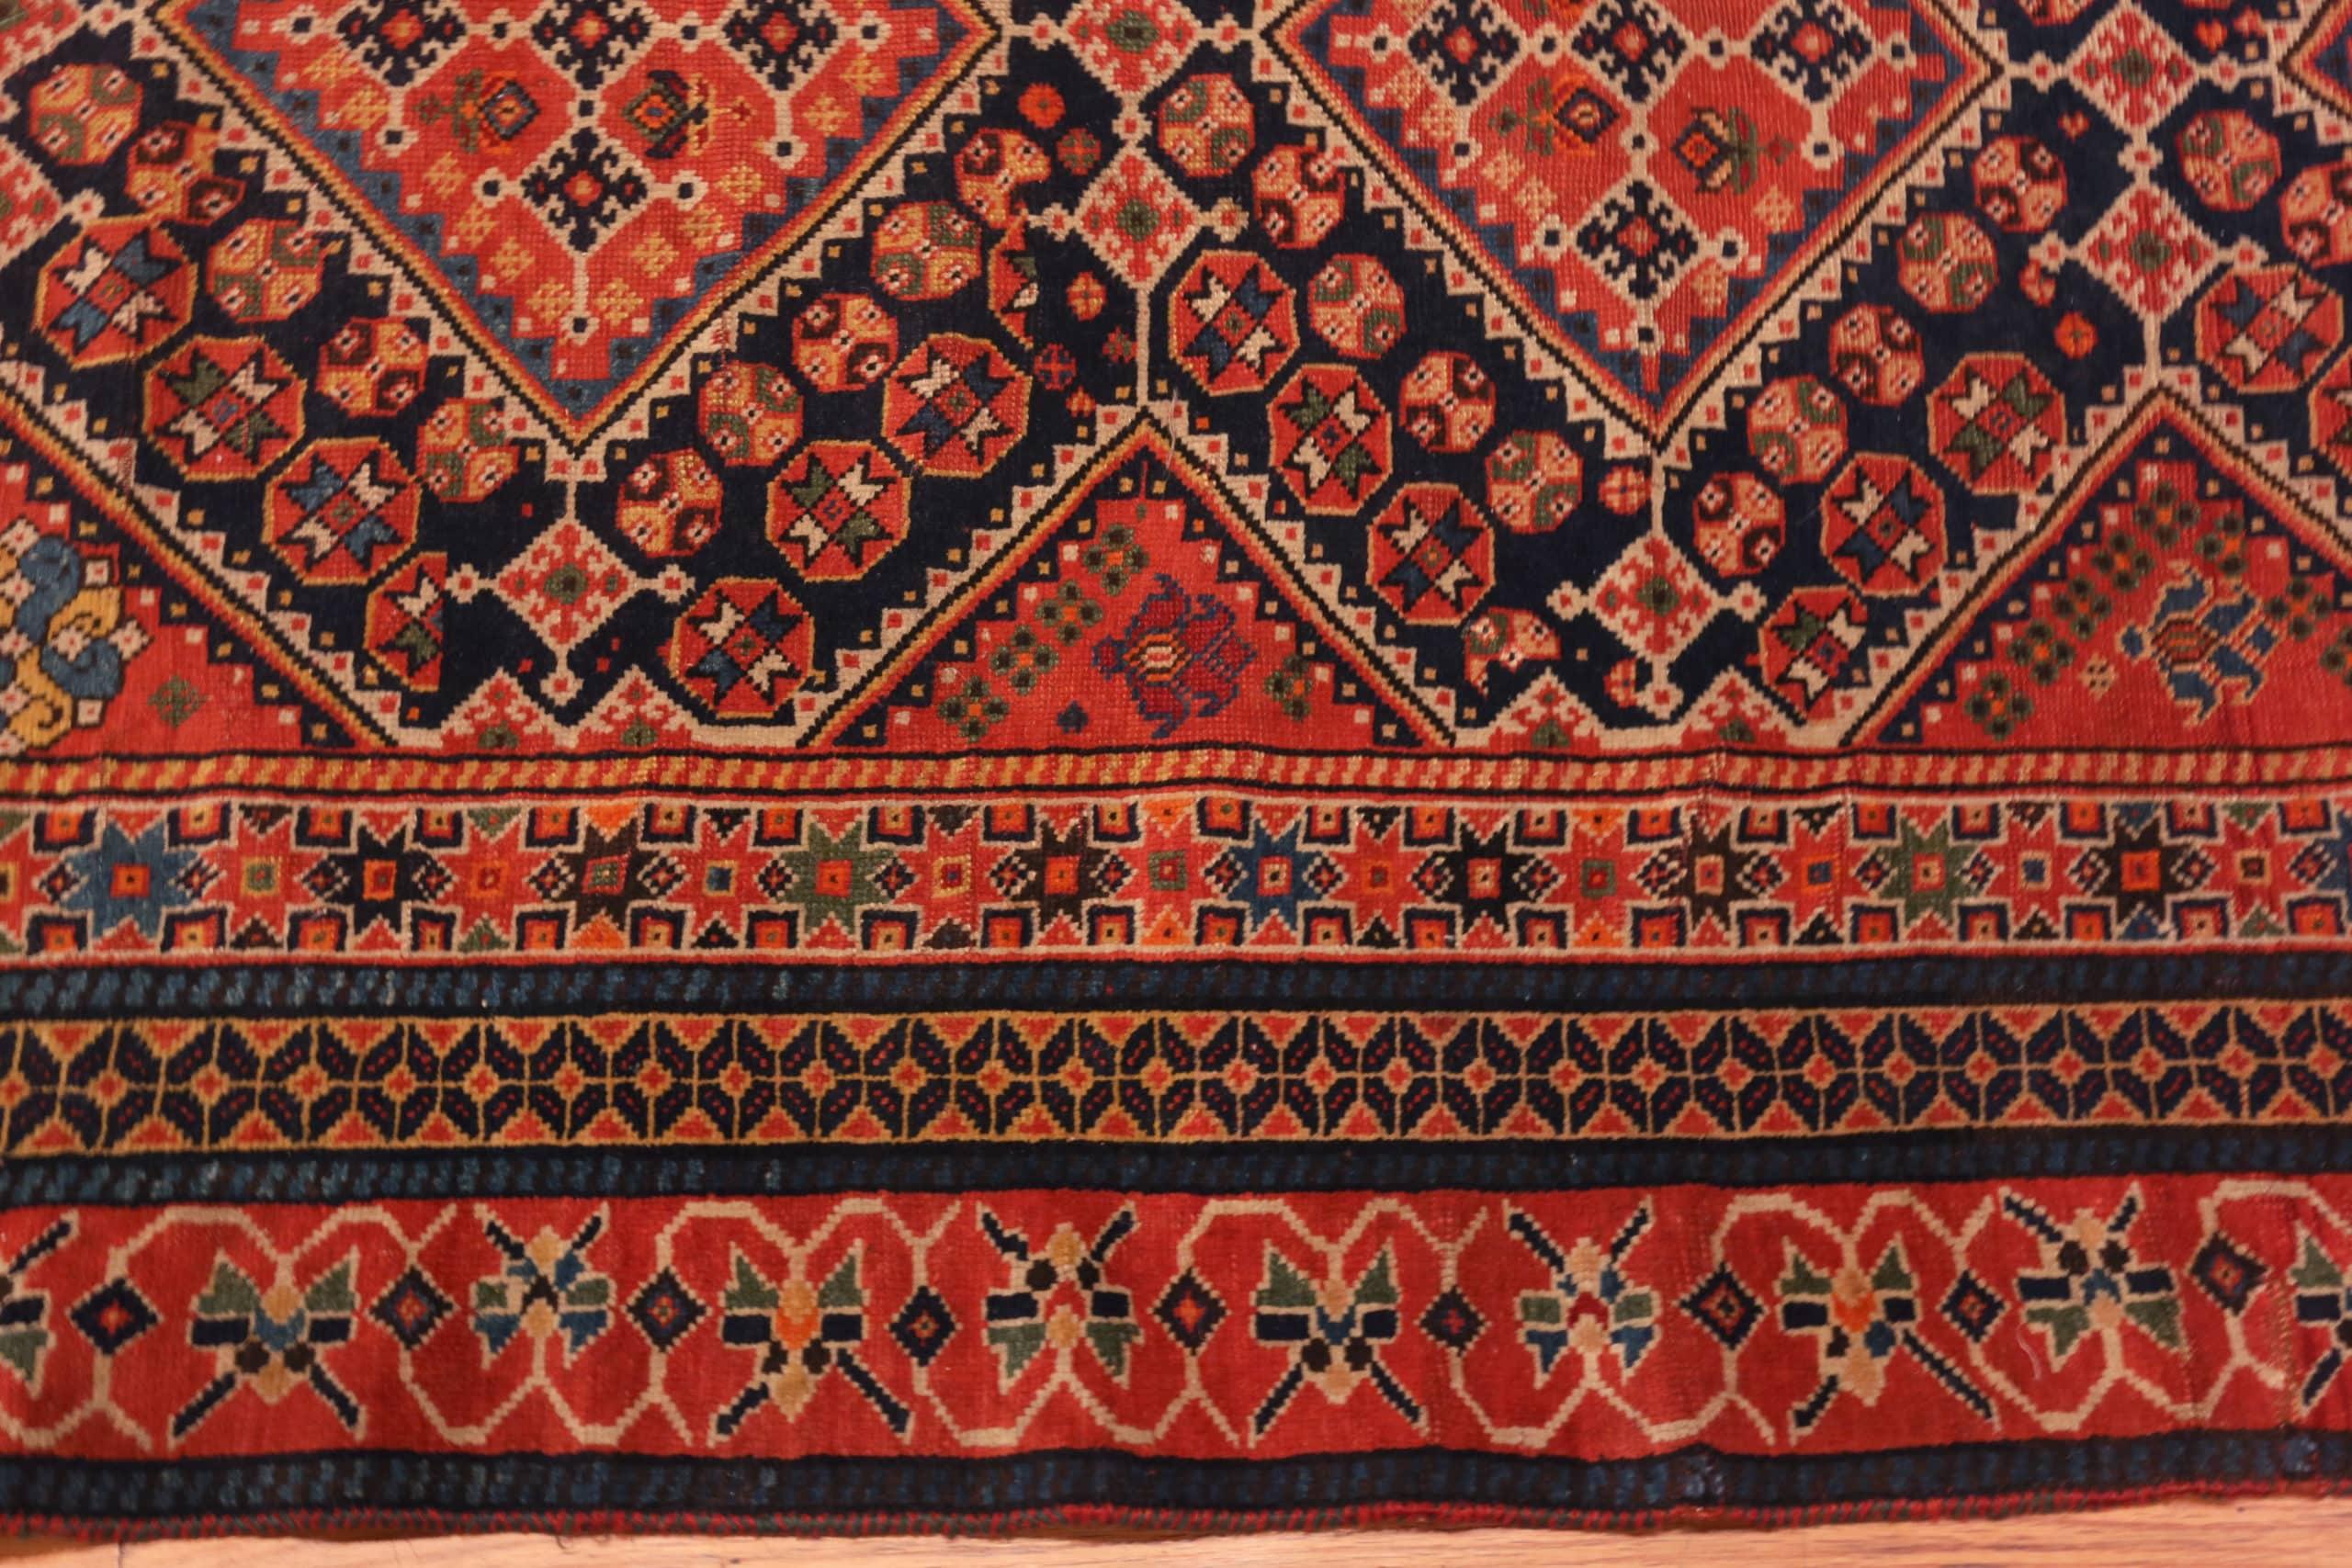 Antique Persian Qashqai Runner Rug, Country Of Origin / Rug Type: Persian Rugs, Circa date: 1900. Size: 4 ft 1 in x 14 ft 3 in (1.24 m x 4.34 m)

   